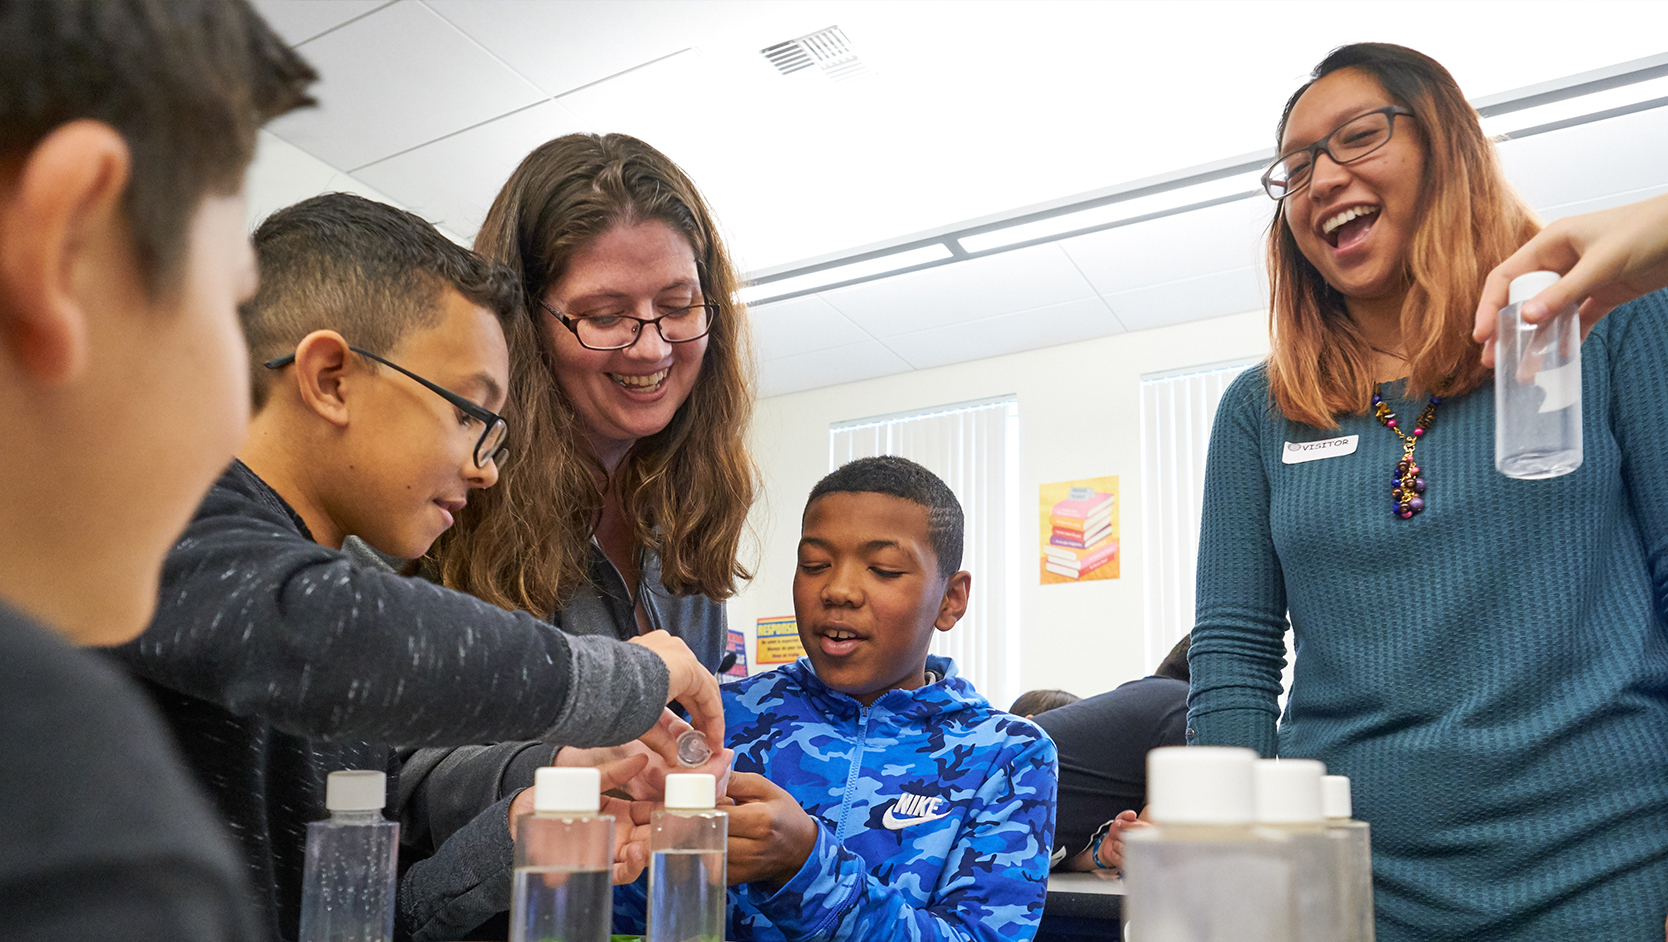 PLU students Jimmy Aung and Jamie Escobar leading a science class at Four Heroes Elementary as they explore the education through a grant funded program, Wednesday, April 17, 2019. (Photo/John Froschauer)